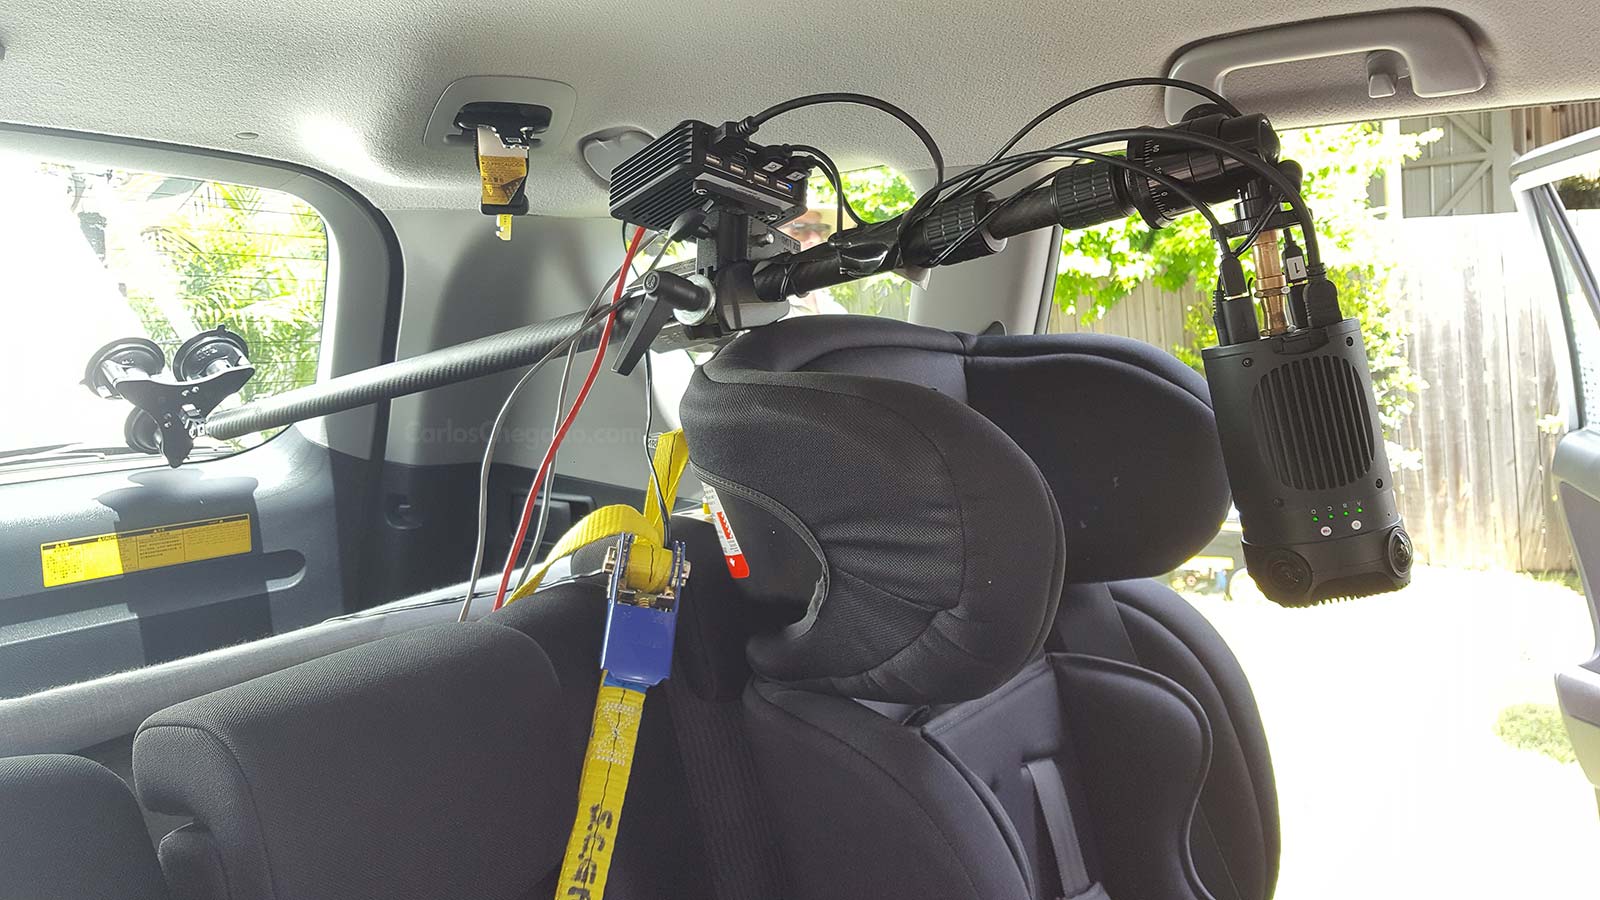 ZCAM S1 mounted inside the car to simulate child POV